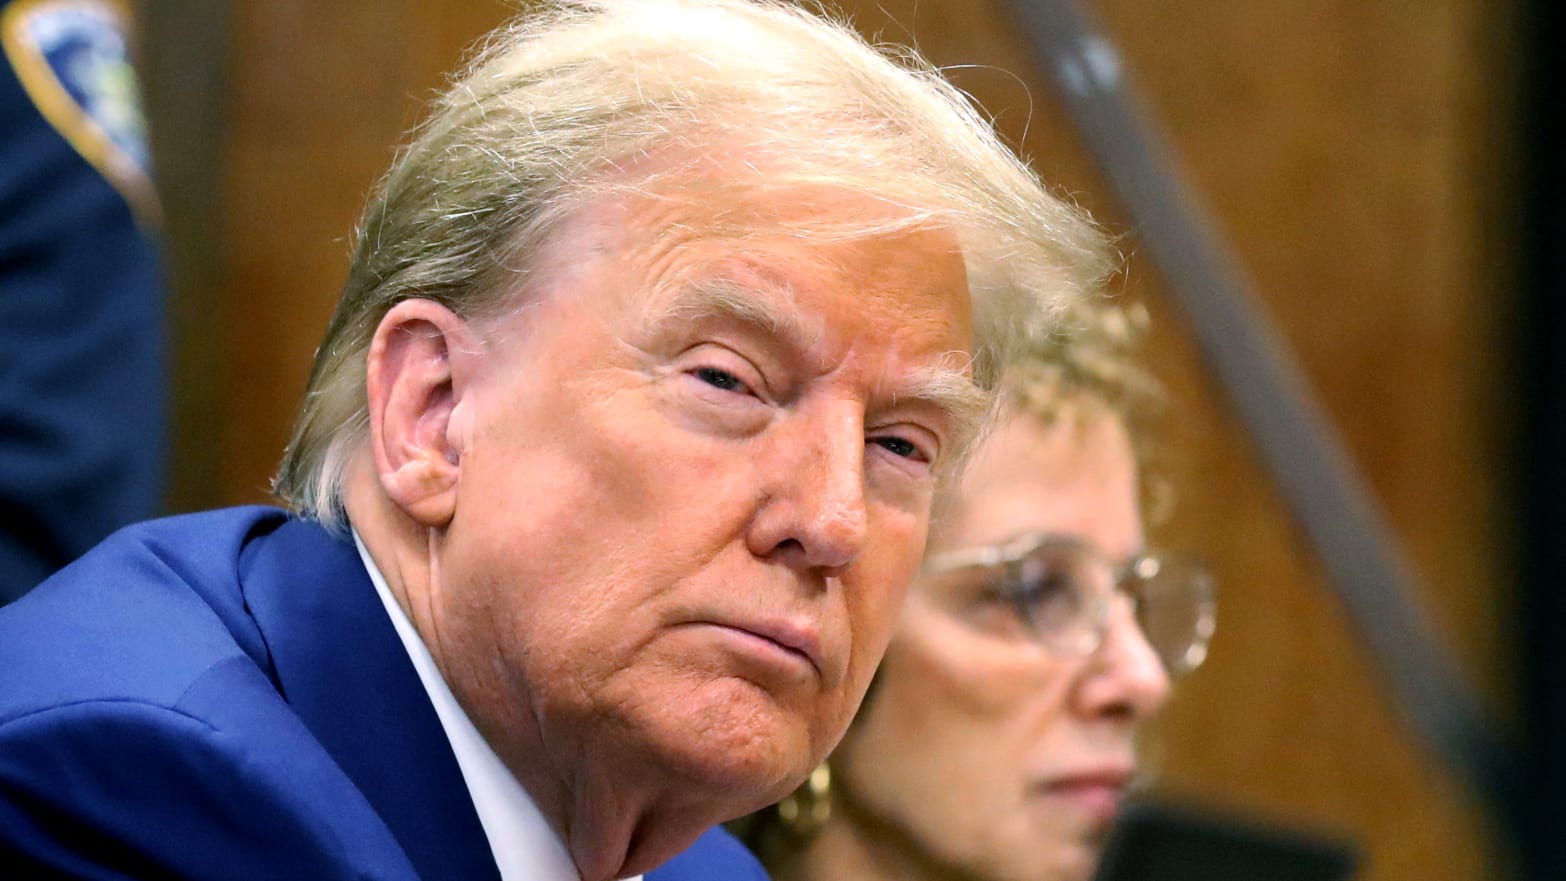 Former president Donald Trump appears with his lawyer Susan Necheles for a pre-trial hearing in a hush money case